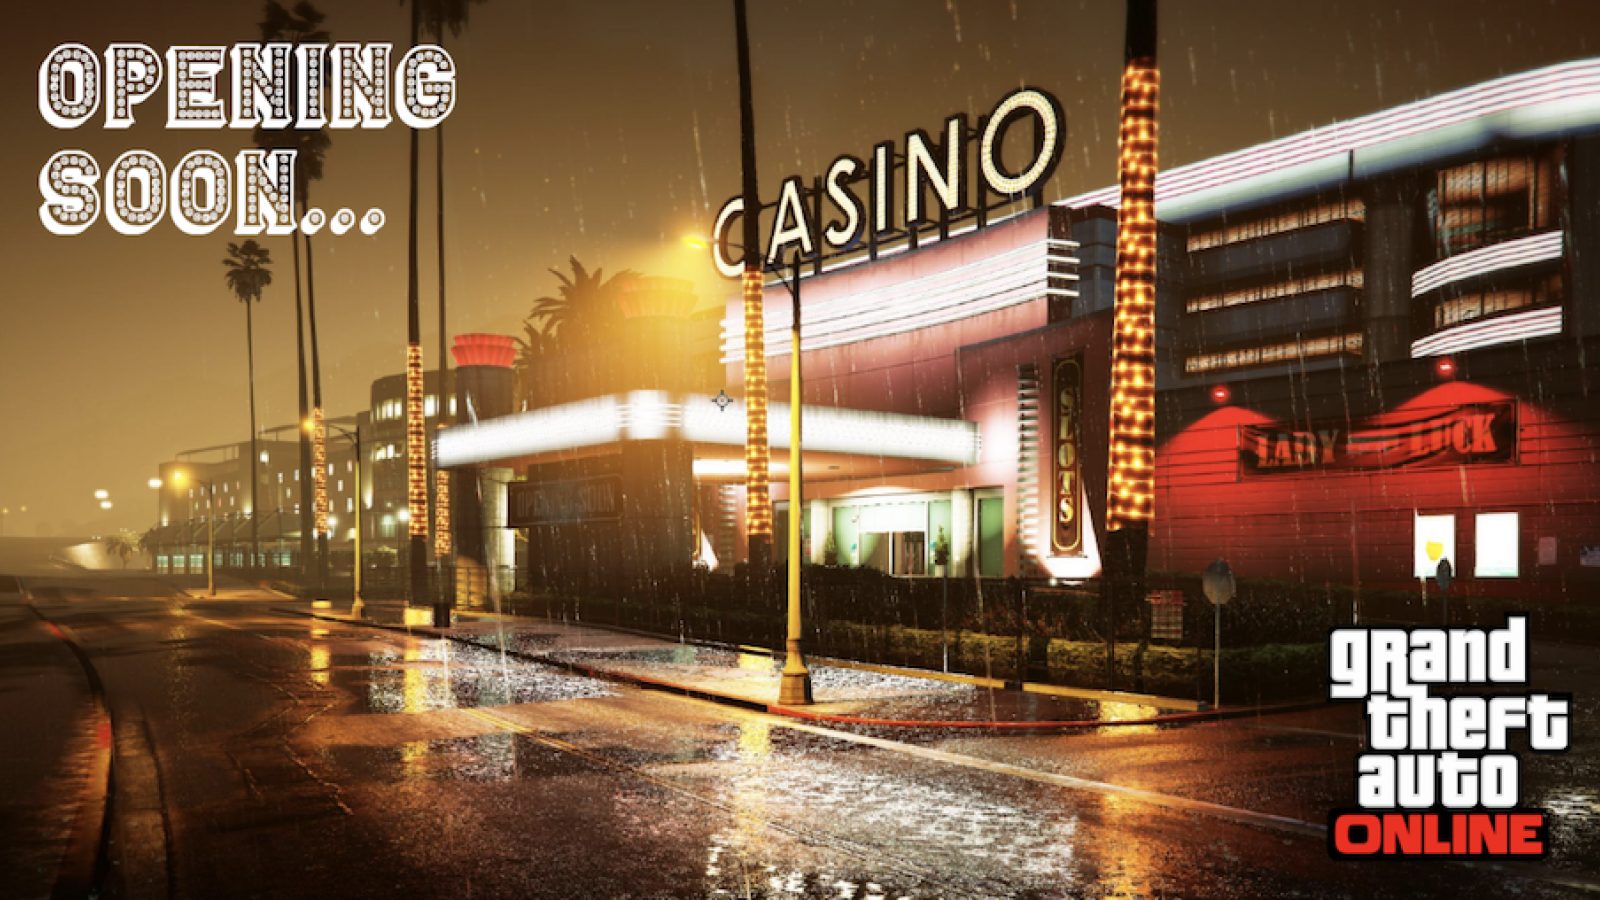 Fall In Love With casino